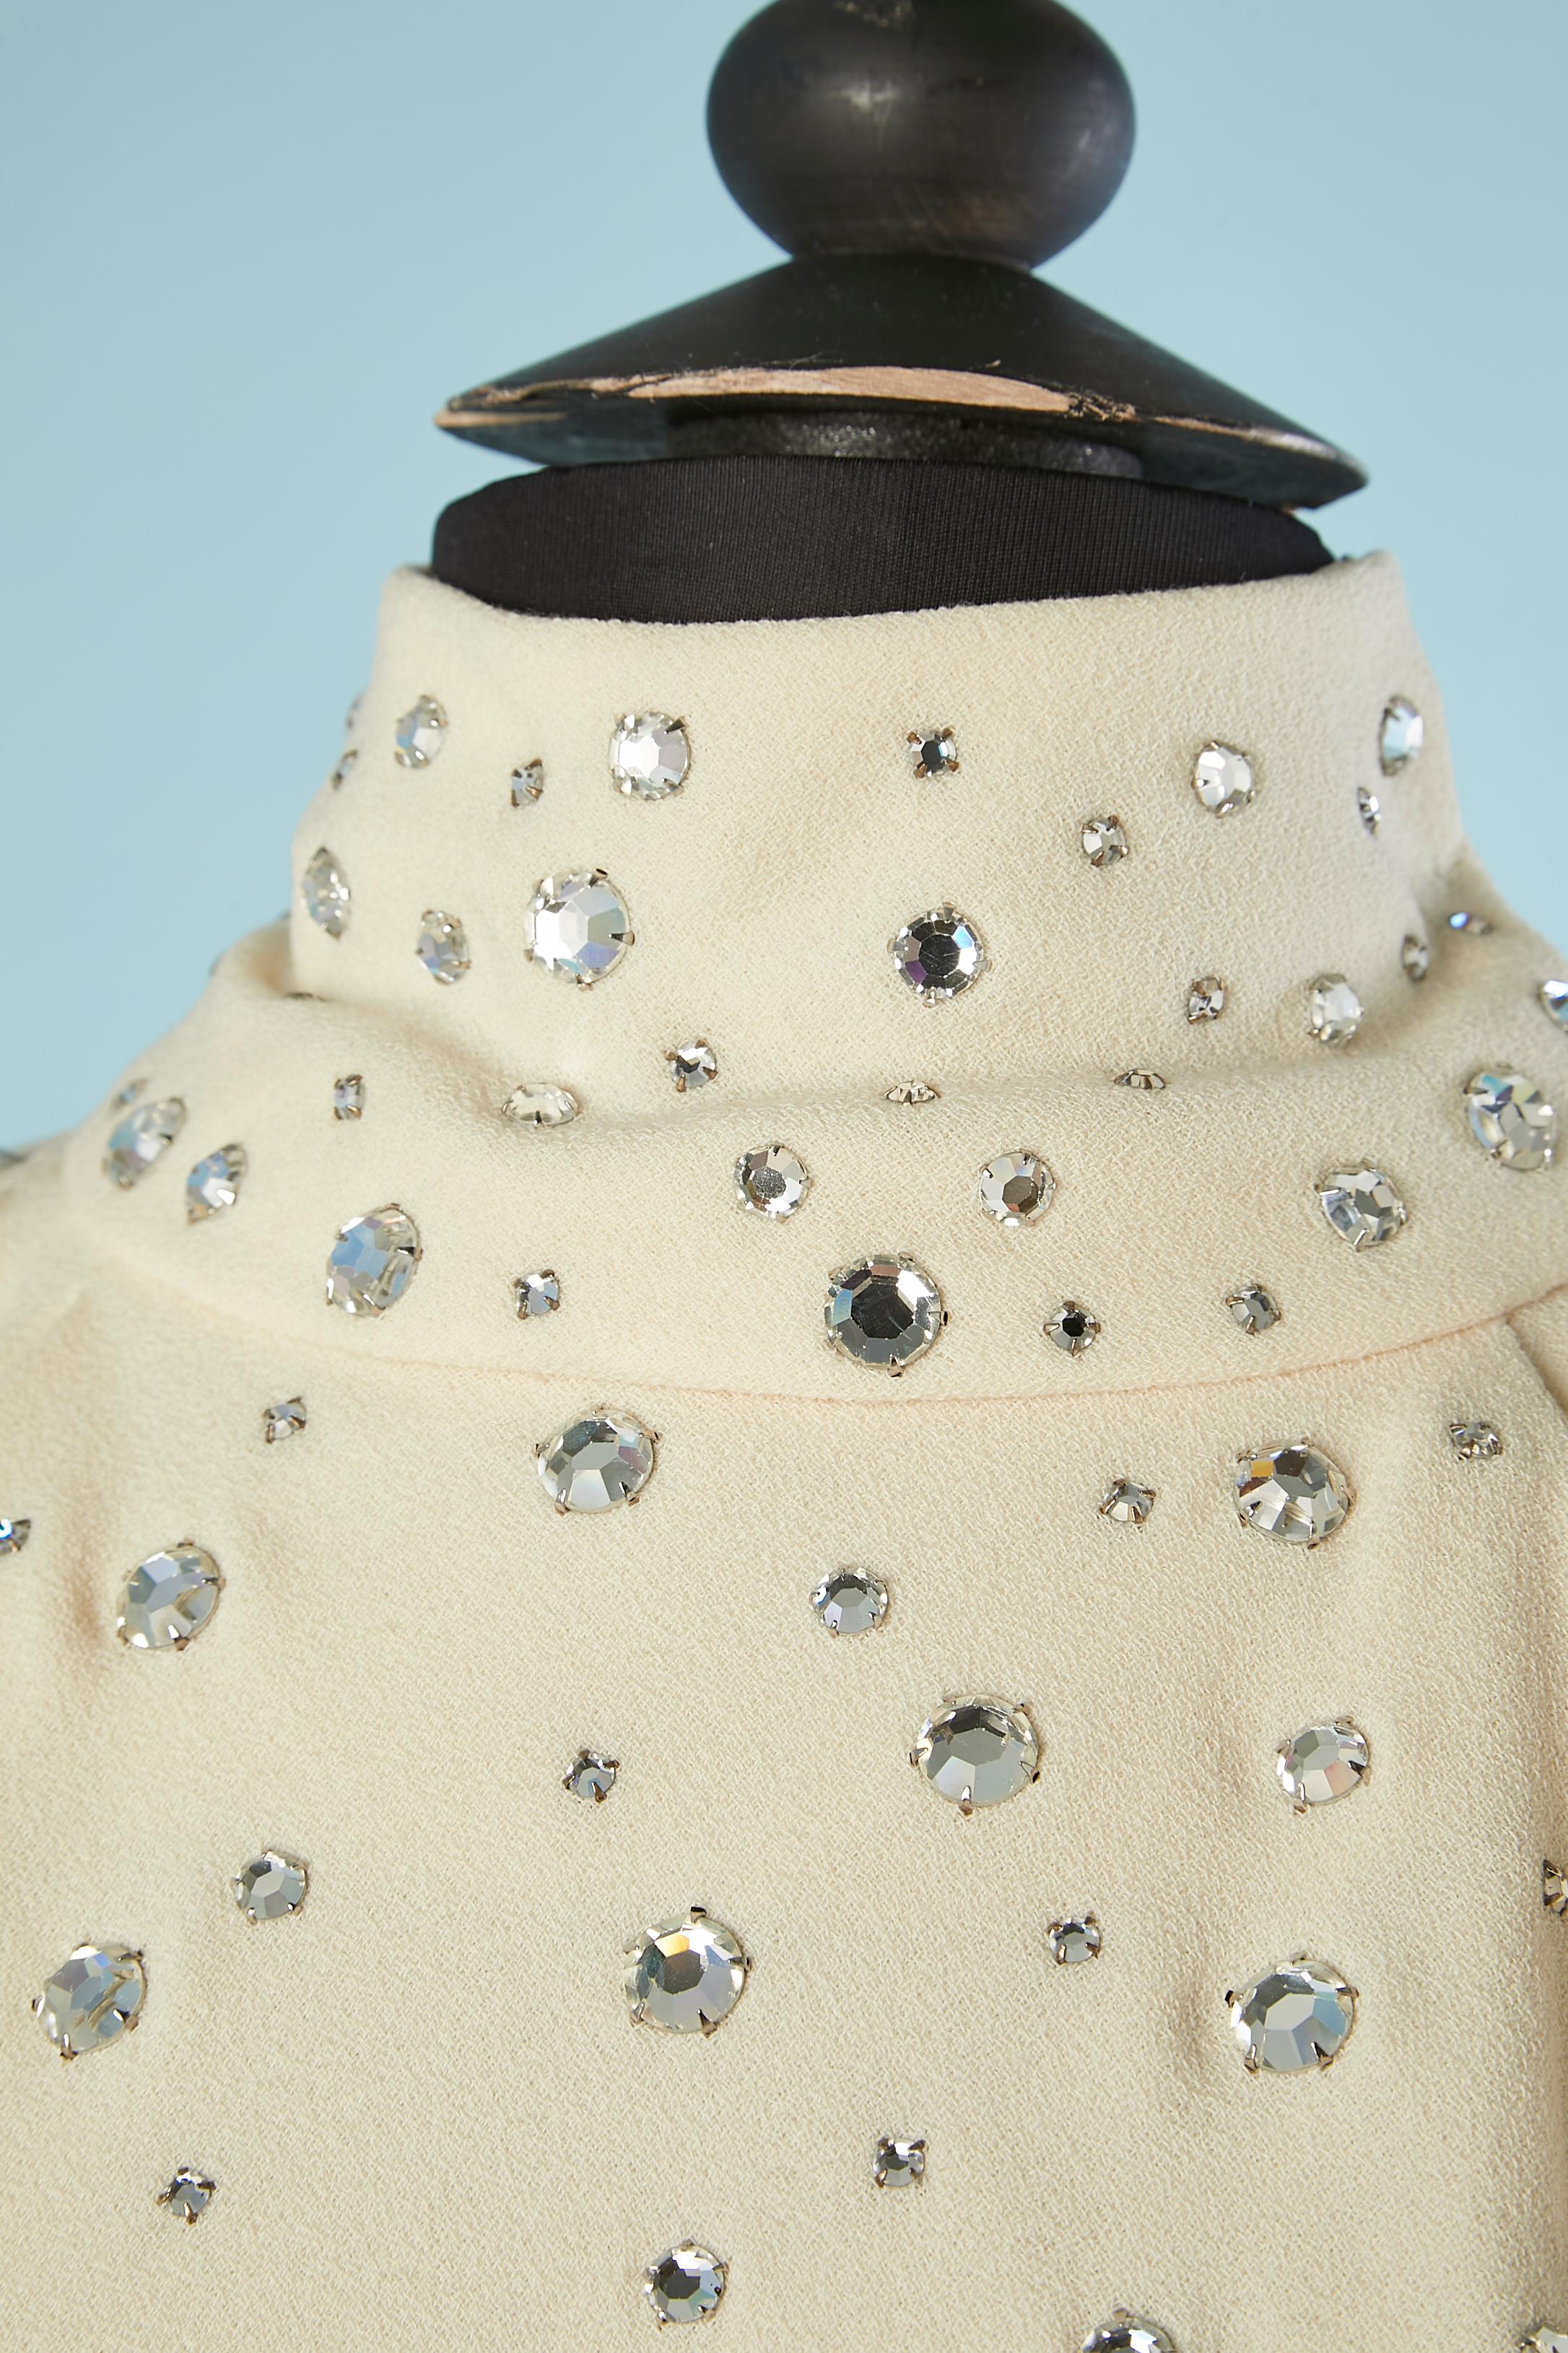 Wool-crêpe sleeveless cocktail dress with rhinestone. Zip and hook&eye middle back. Pauline Trigère (November 4, 1908 – February 13, 2002) was a Franco-American couturière. Her award-winning styles reached their height of popularity in the United